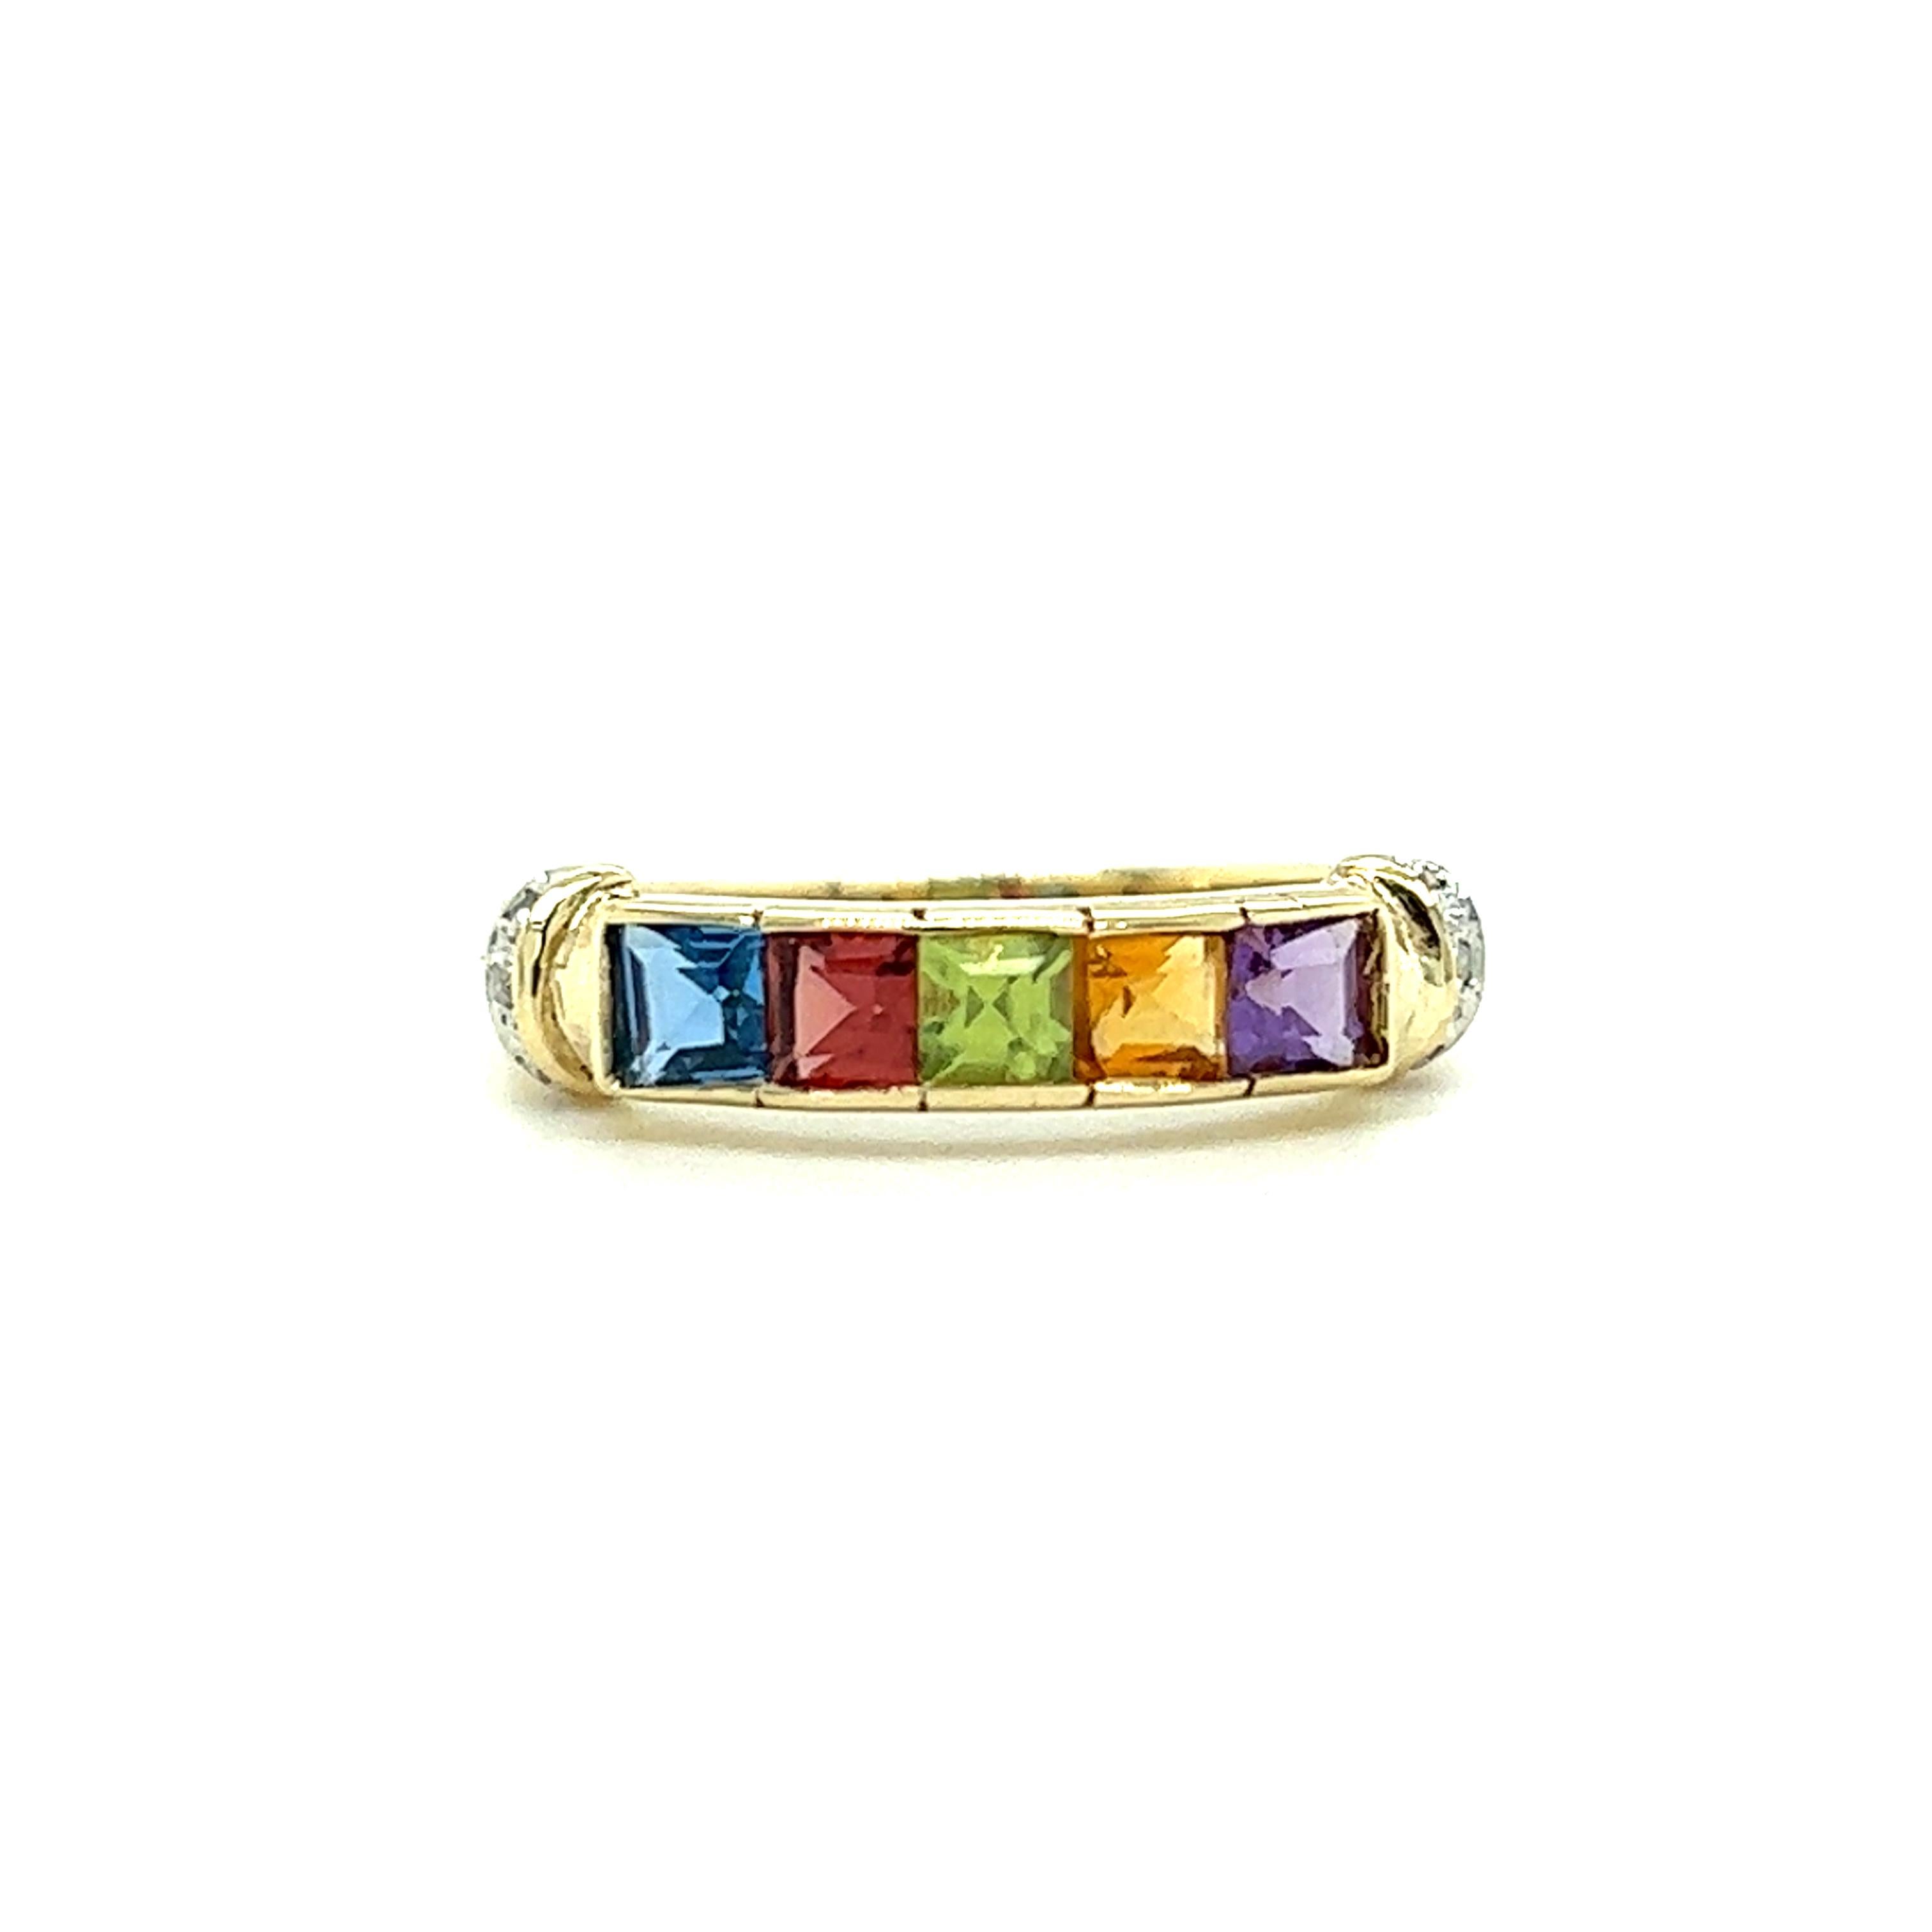 One 14 karat yellow gold ring, channel set with five 5.3mm square cut gemstones, one citrine, one amethyst, one peridot, one pink tourmaline, and one blue topaz, and six (6) brilliant cut diamonds, approximately .03 carat total weight with matching